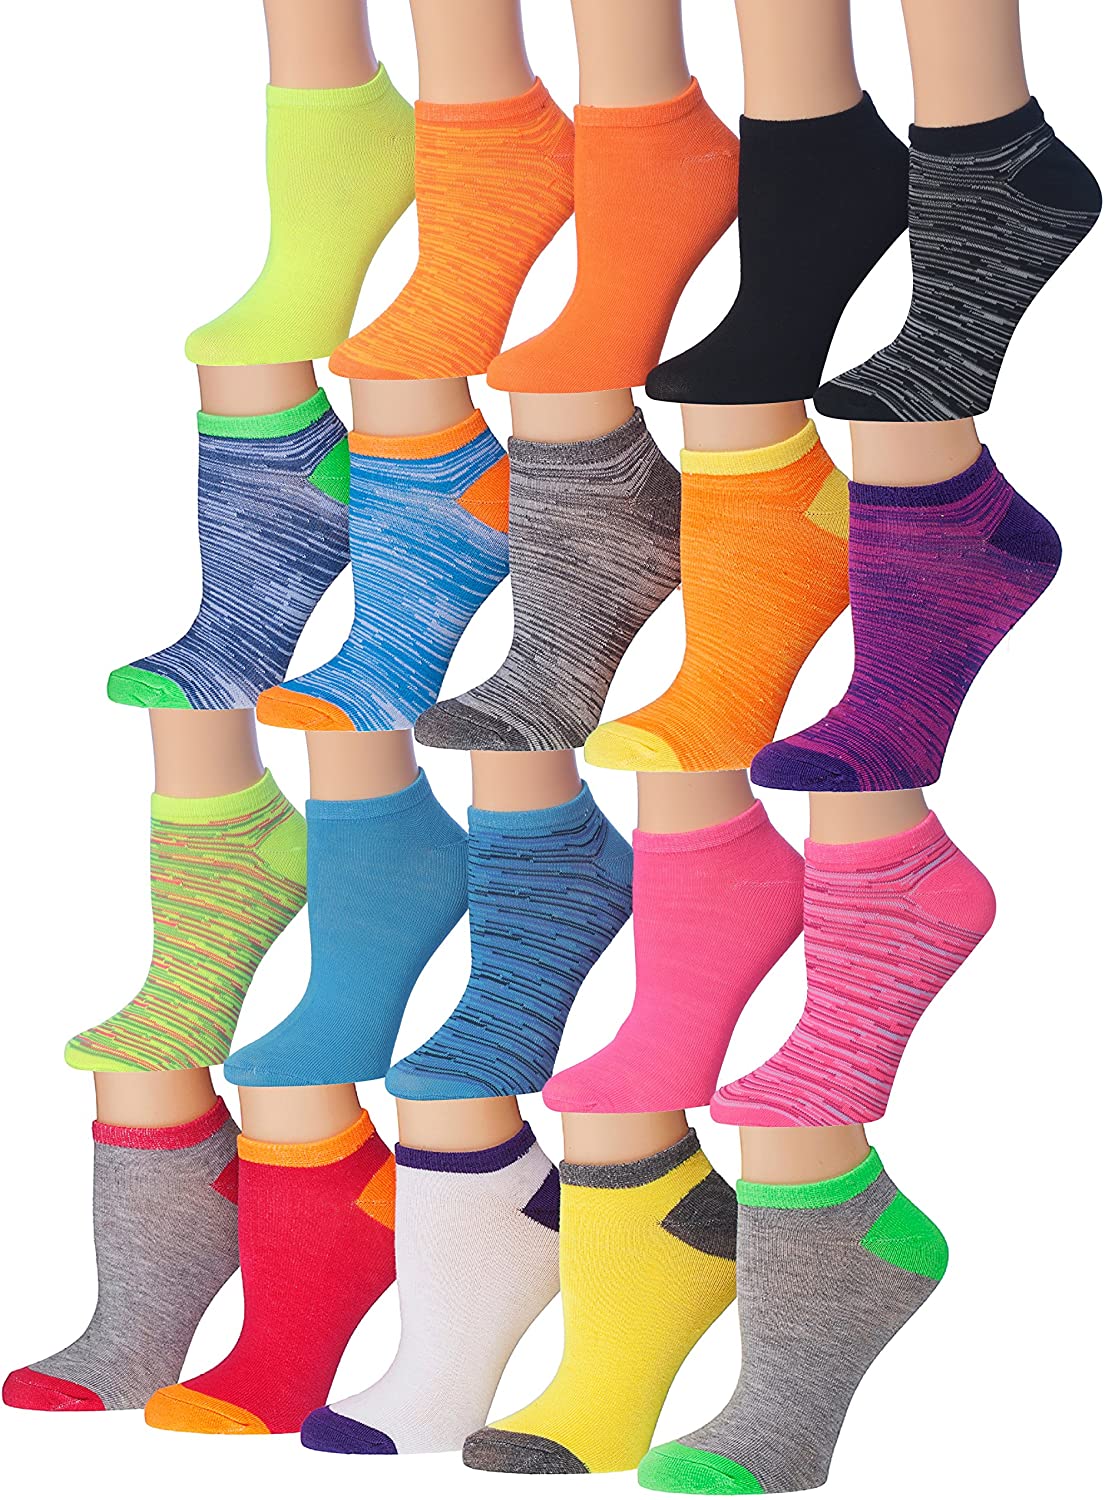 Tipi Toe Womens 6-Pairs Colorful Patterned Low Cut/No Show Socks 